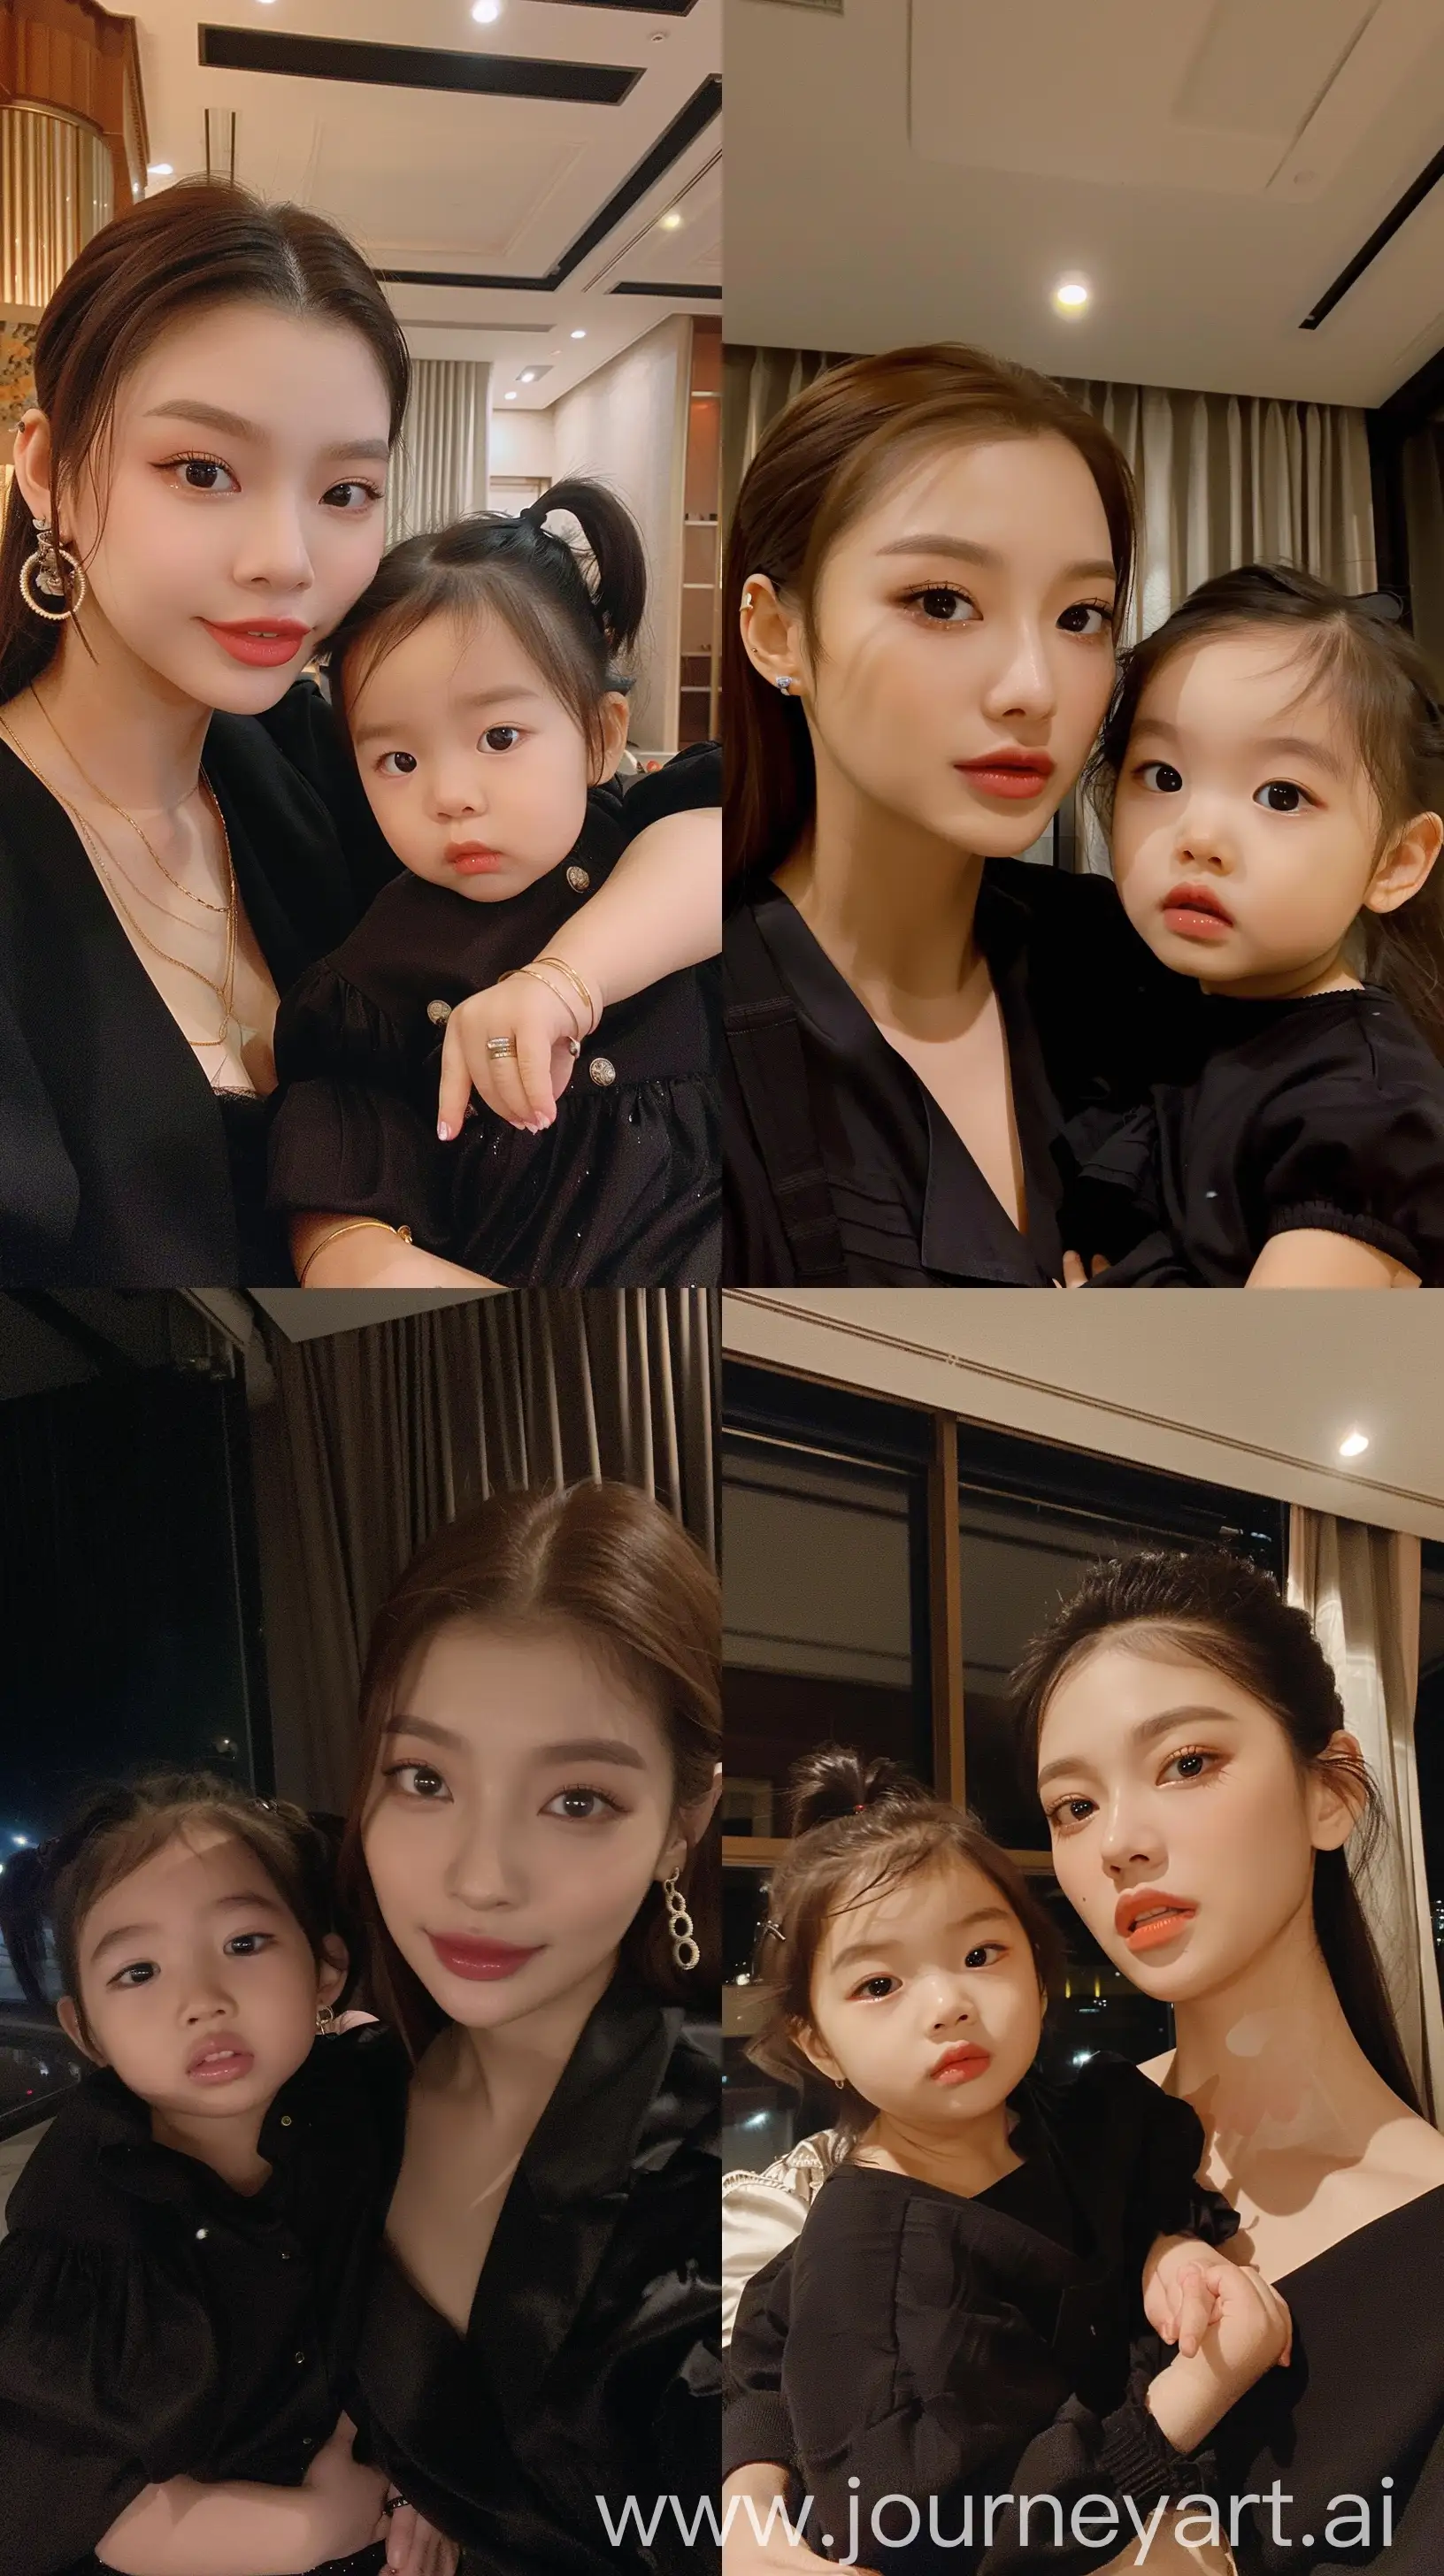 blackpink's jennie selfie with 2 years old  girl, facial feature look a like blackpink's jennie, aestethic selfie, wearing black outfit, night times, aestethic make up,hotly elegant young mom --ar 9:16